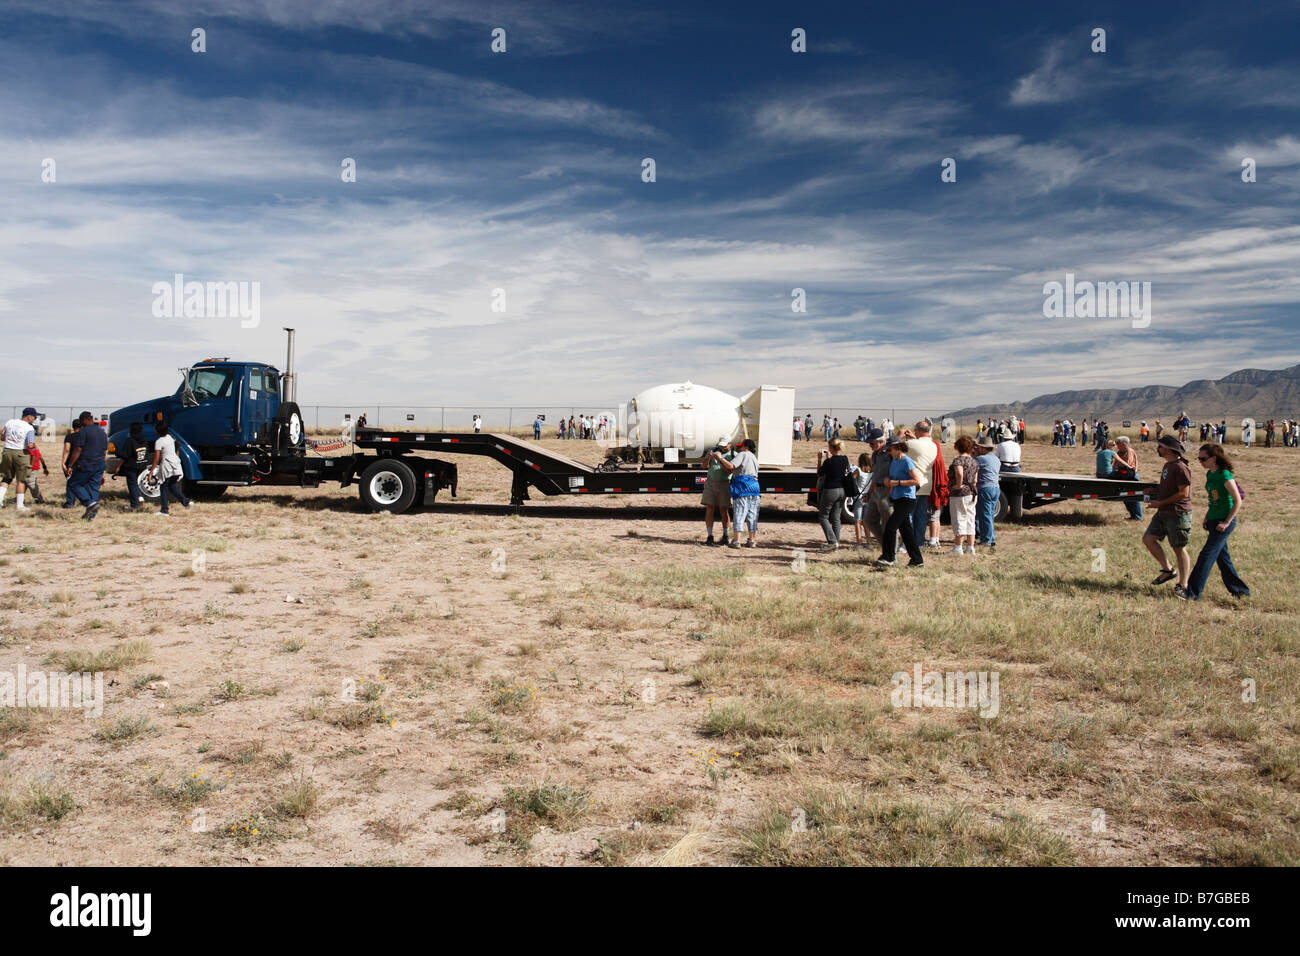 'Fat Man' bomb casing on display at Trinity Site, NM, sight of the world's first atomic bomb explosion. Stock Photo